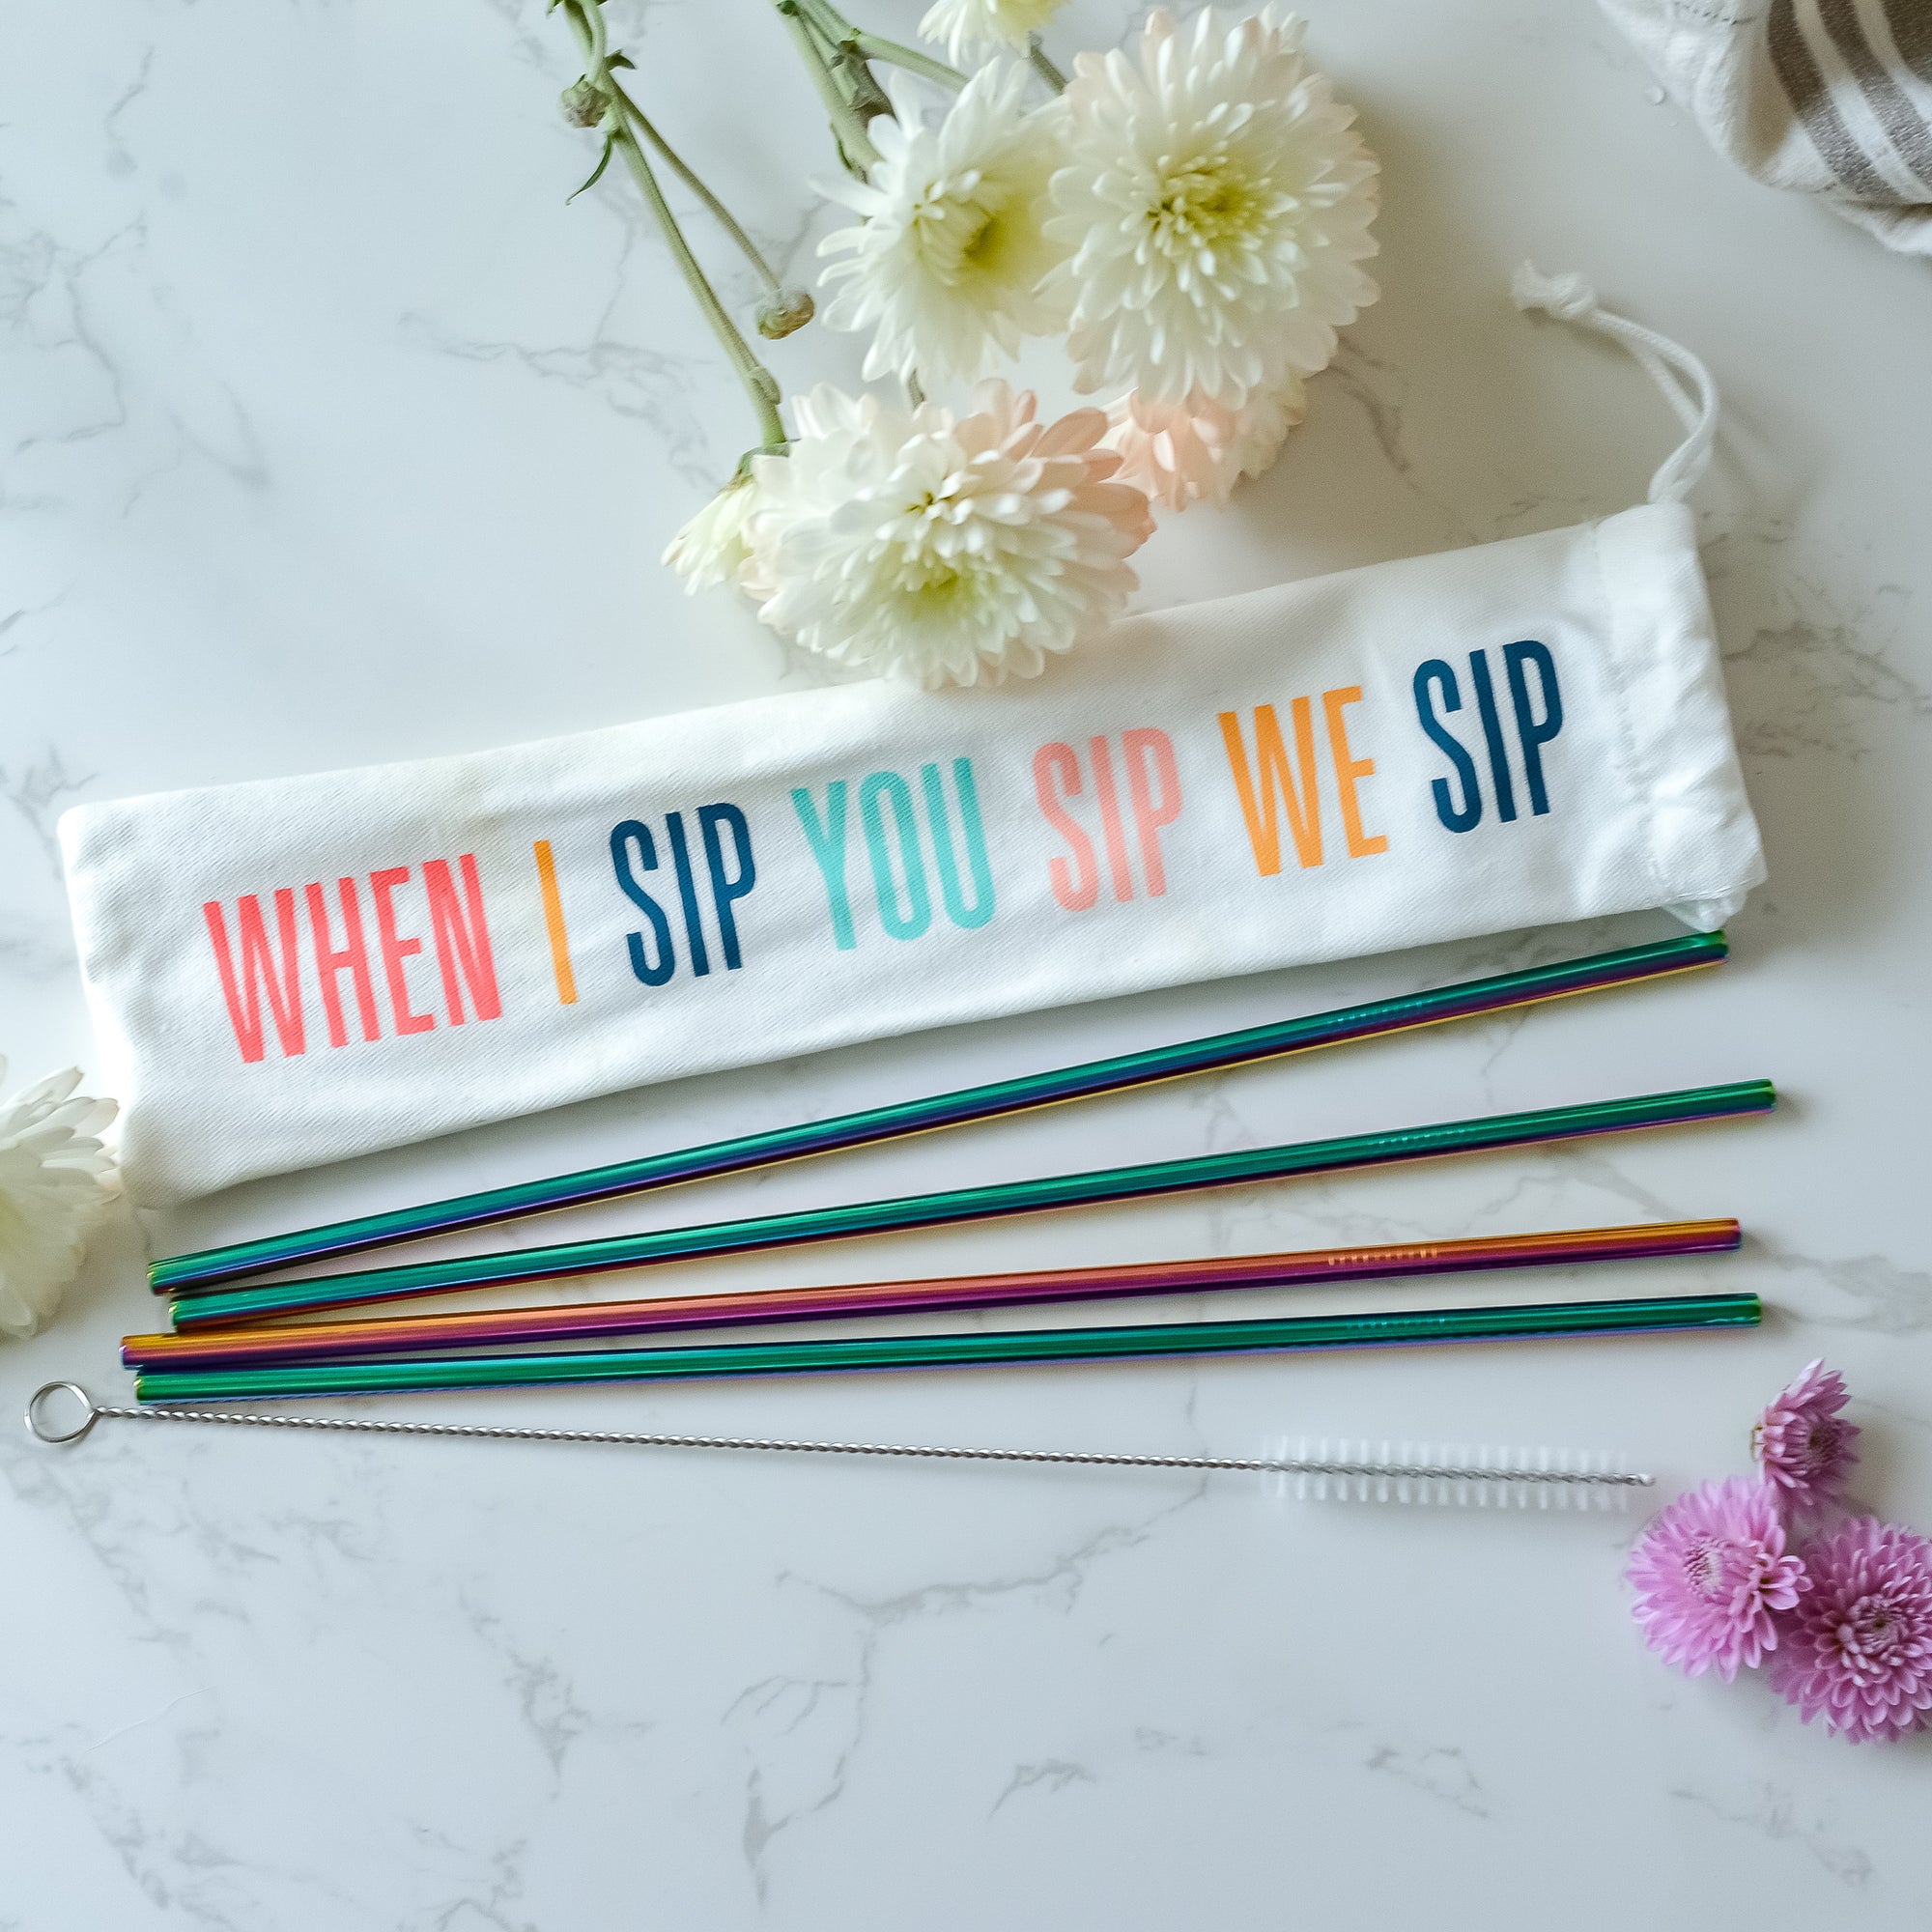 When I Sip You Sip We Sip Stainless Steel Straw Set of 4